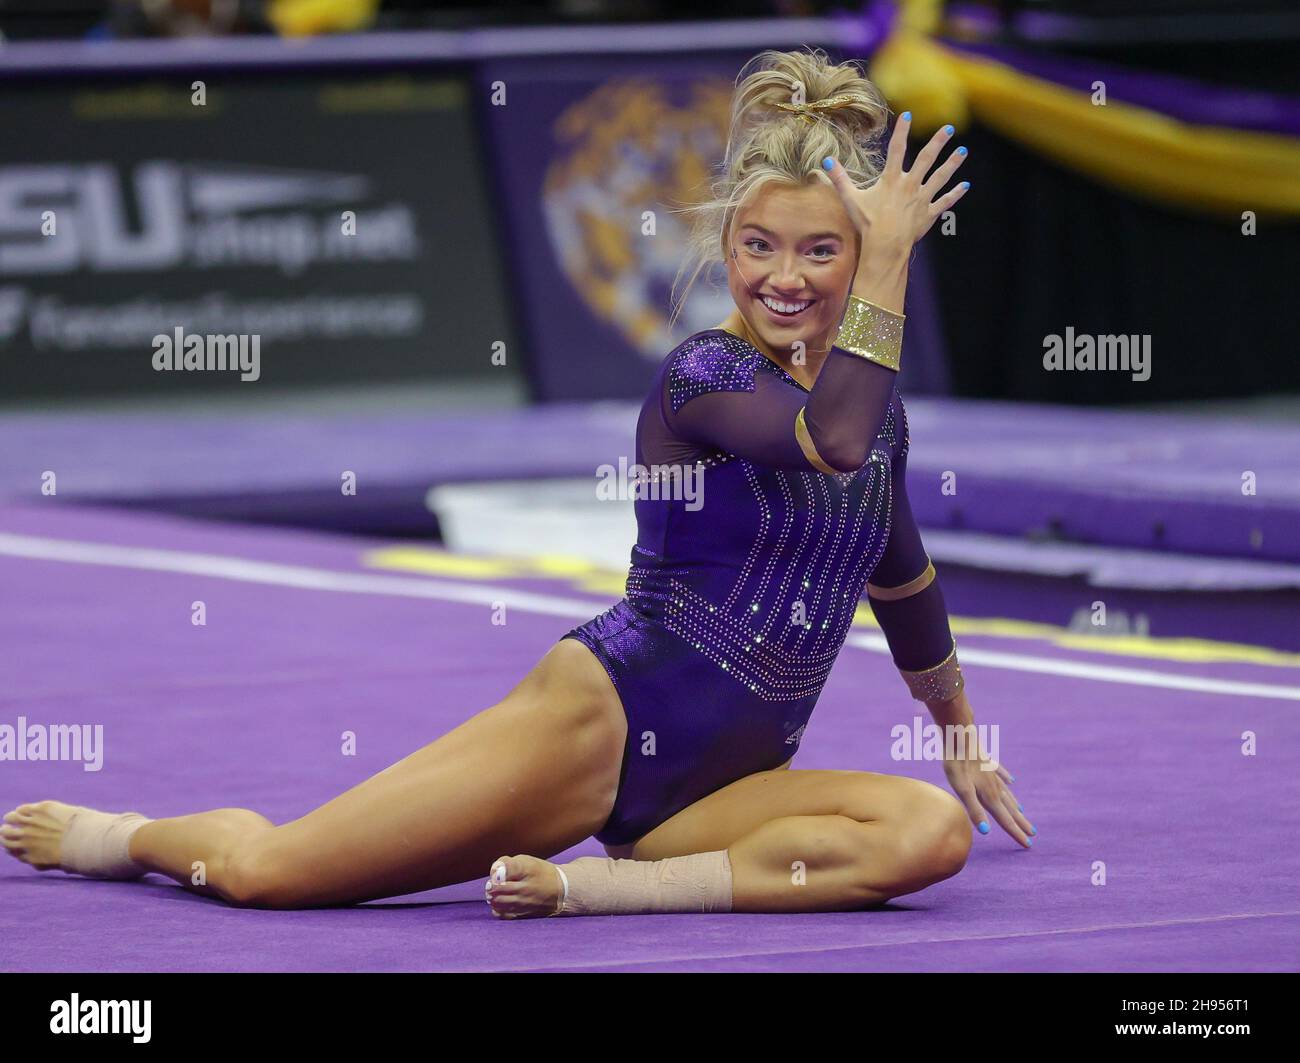 December 3 2021 Lsu S Reagan Campbell Performs Her Floor Routine During The Ncaa Gymnastics